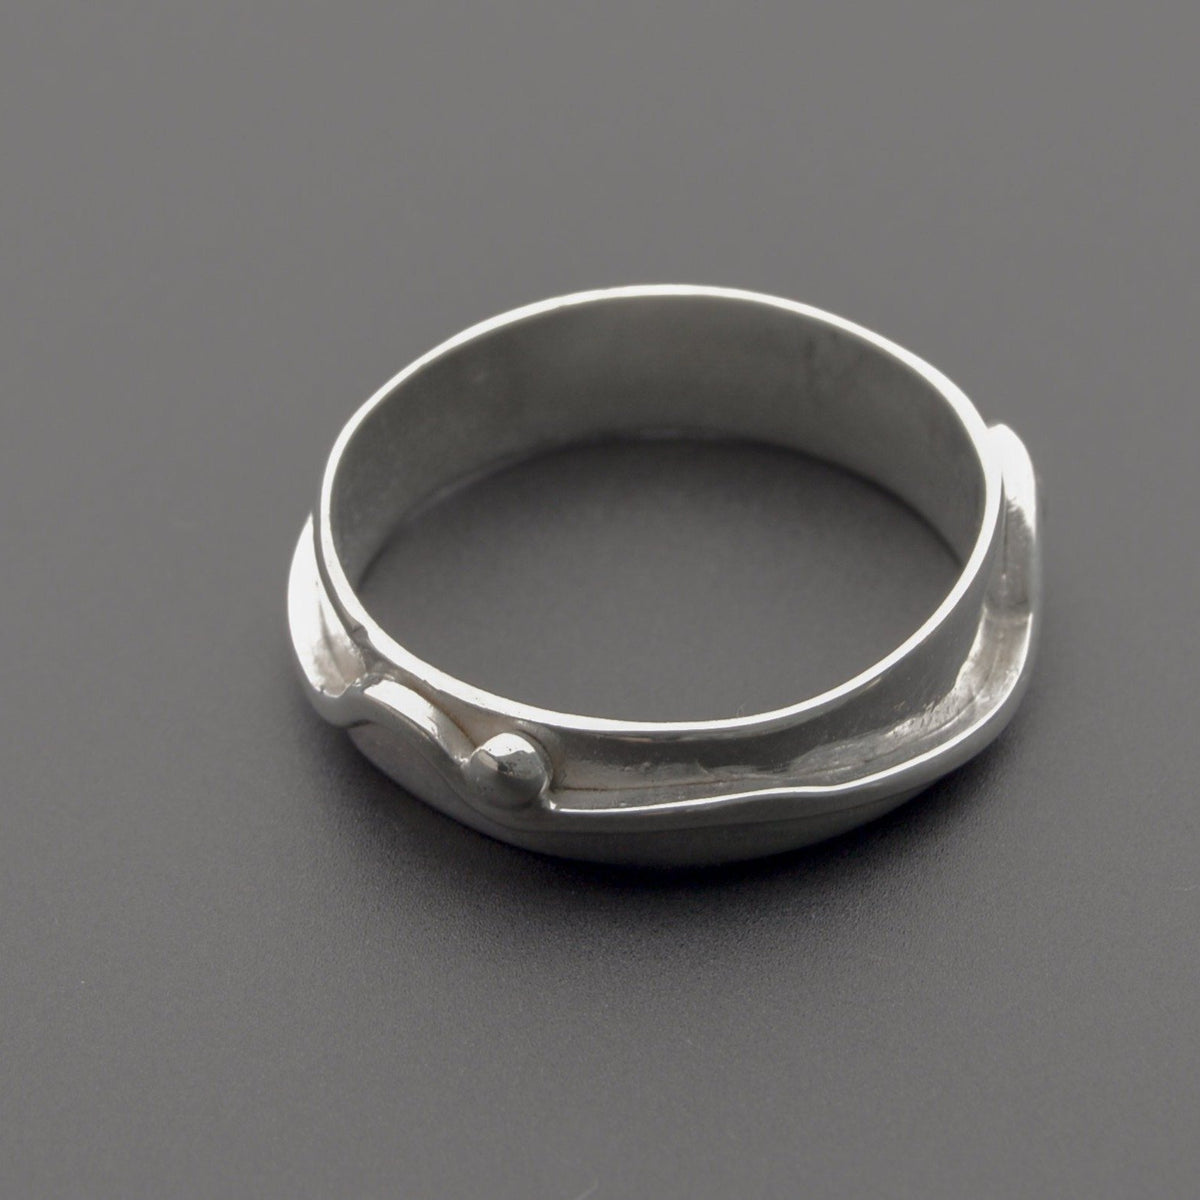 Unique hand made silver ring